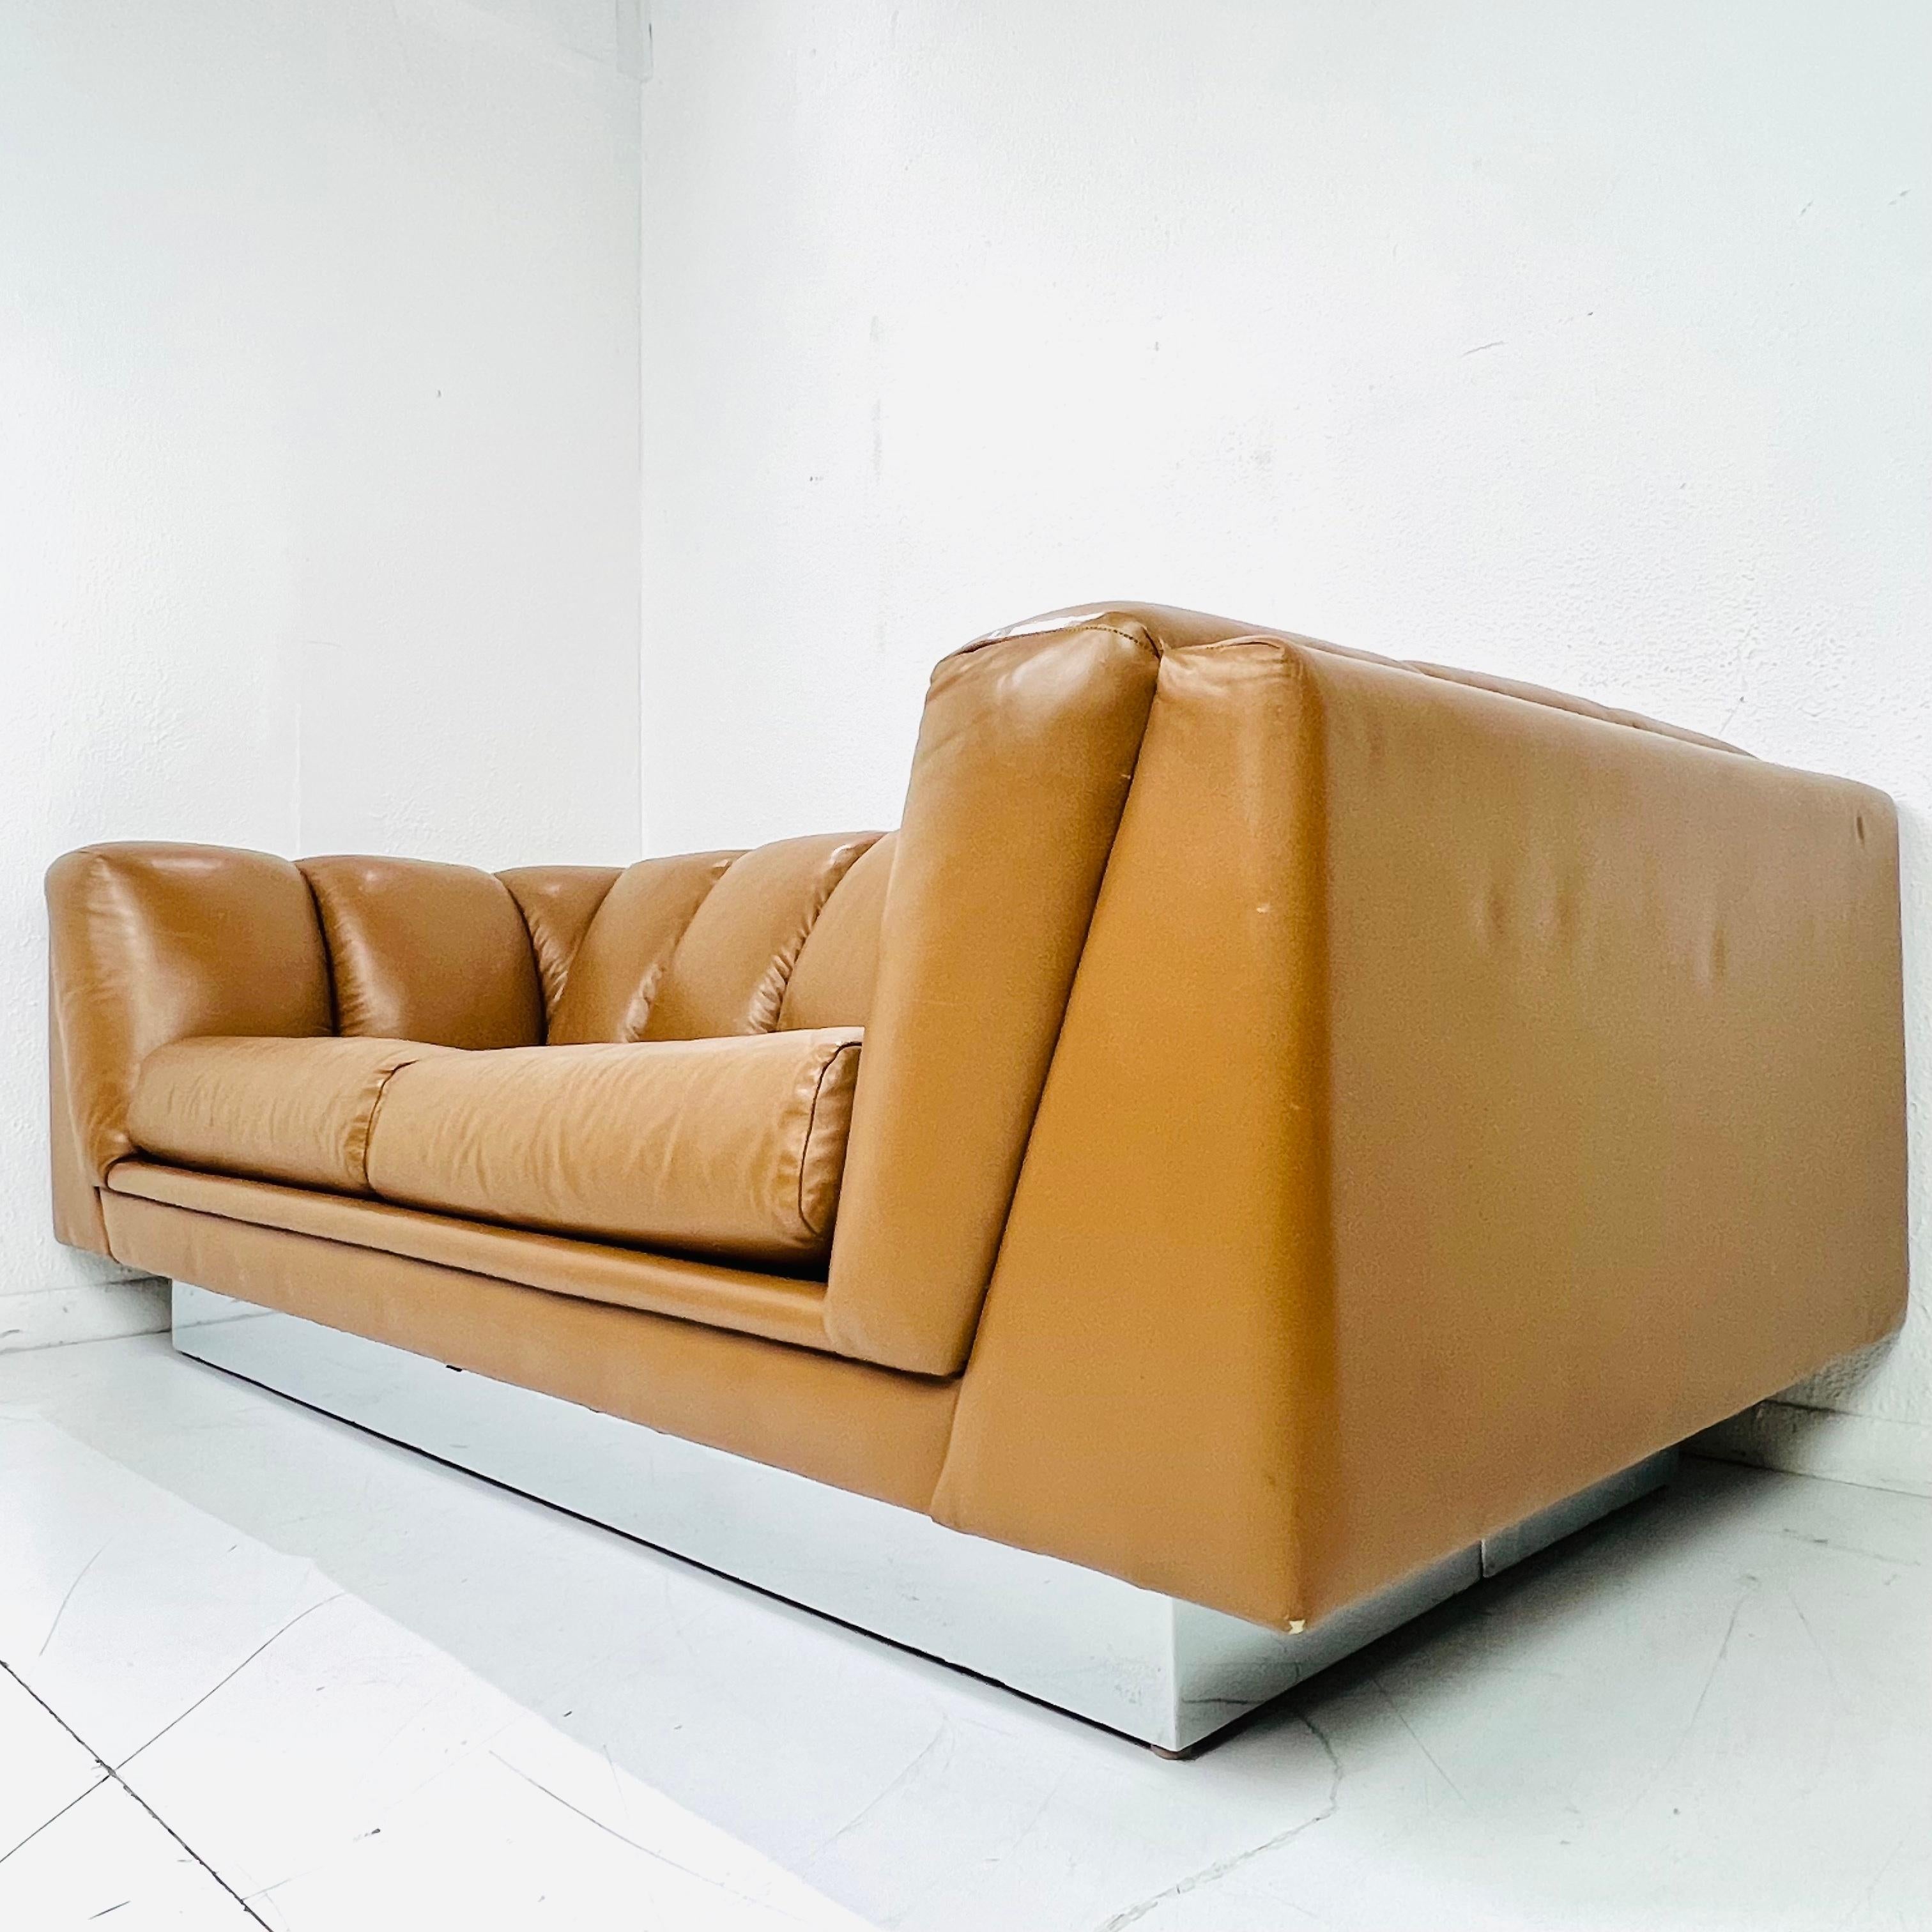 Post-Modern 1970's Channeled Leather Sofa by Metropolitan For Sale